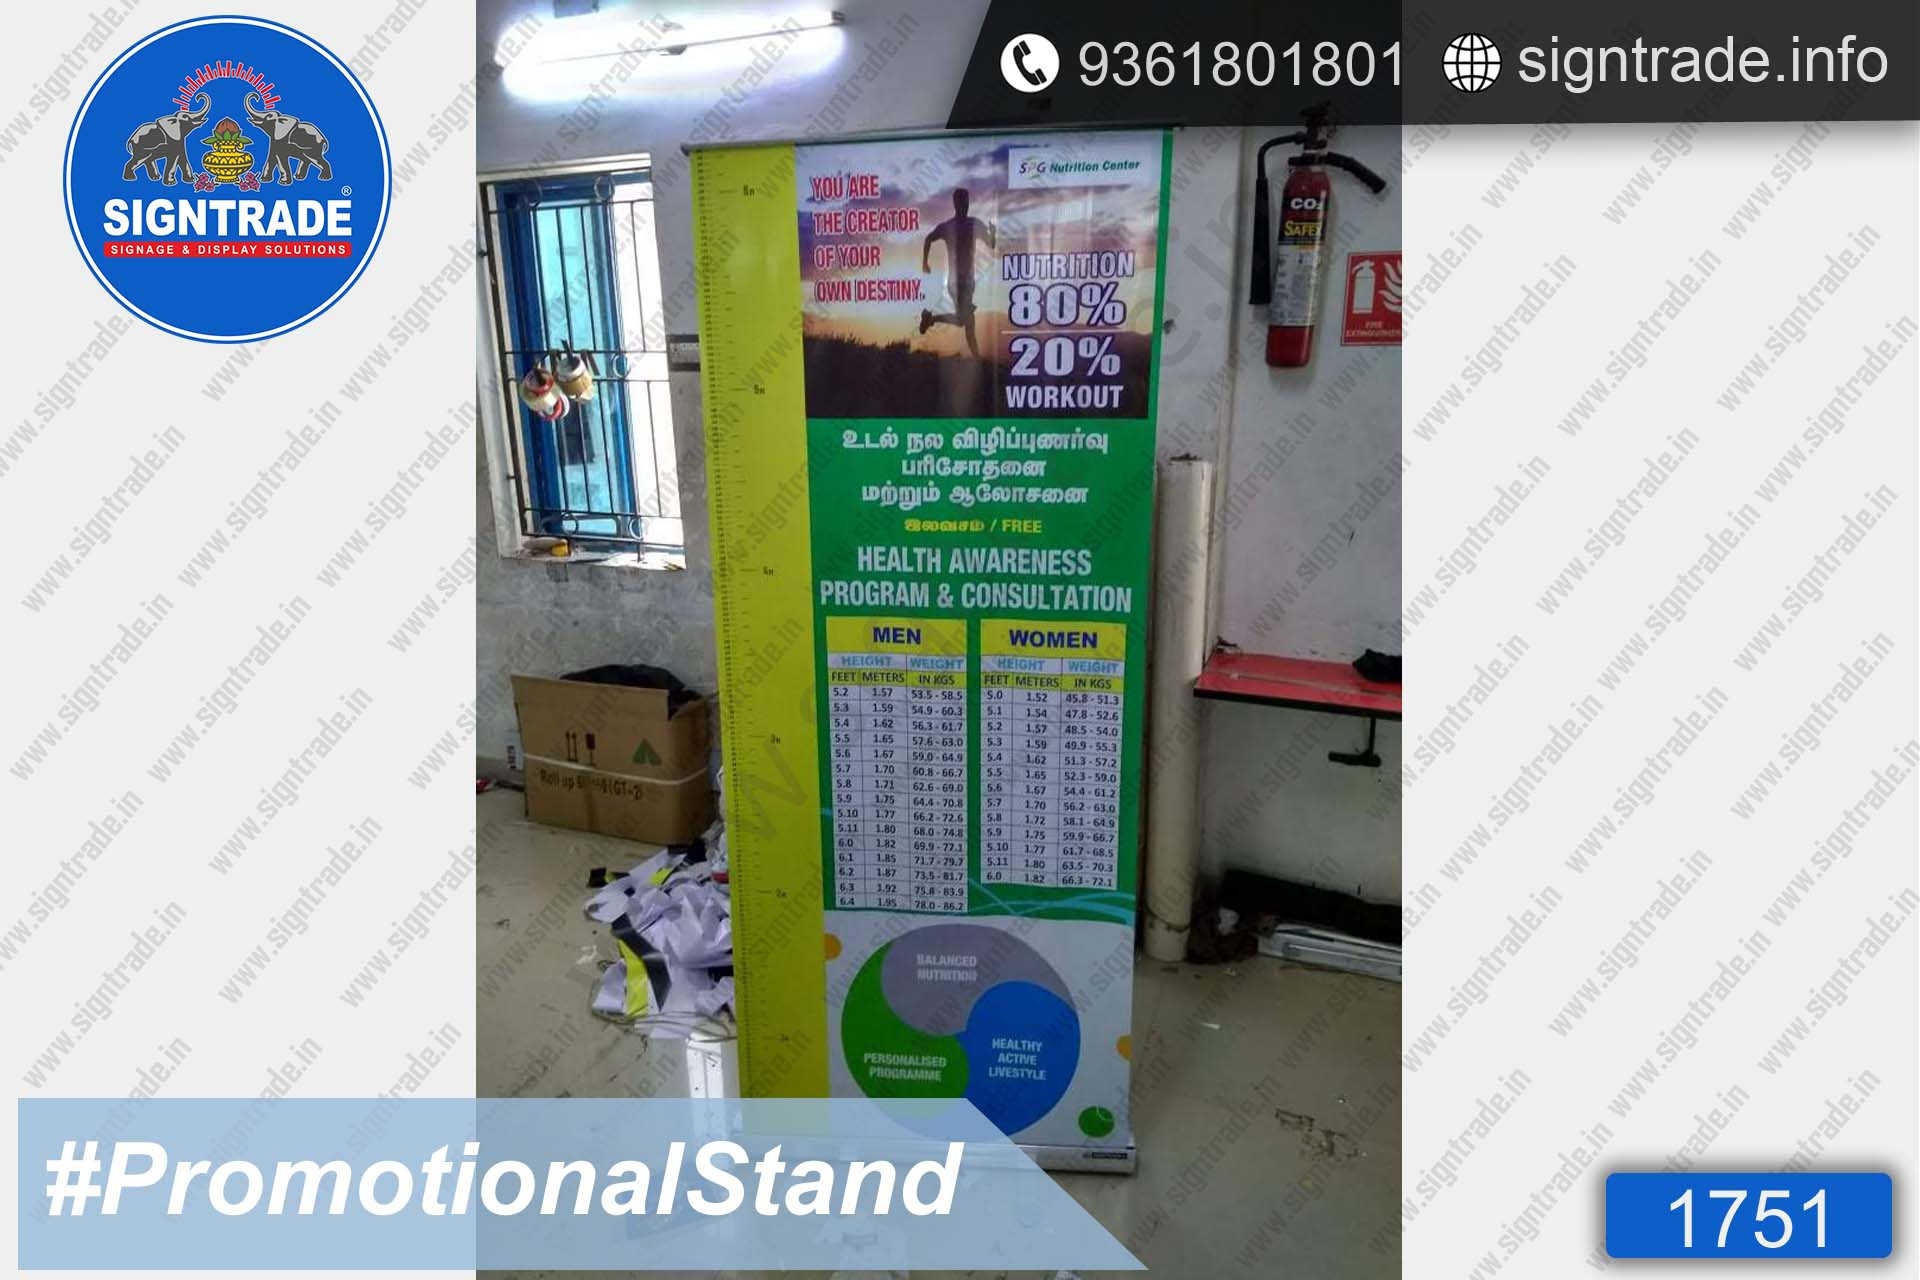 spg nutrition center promotional standee